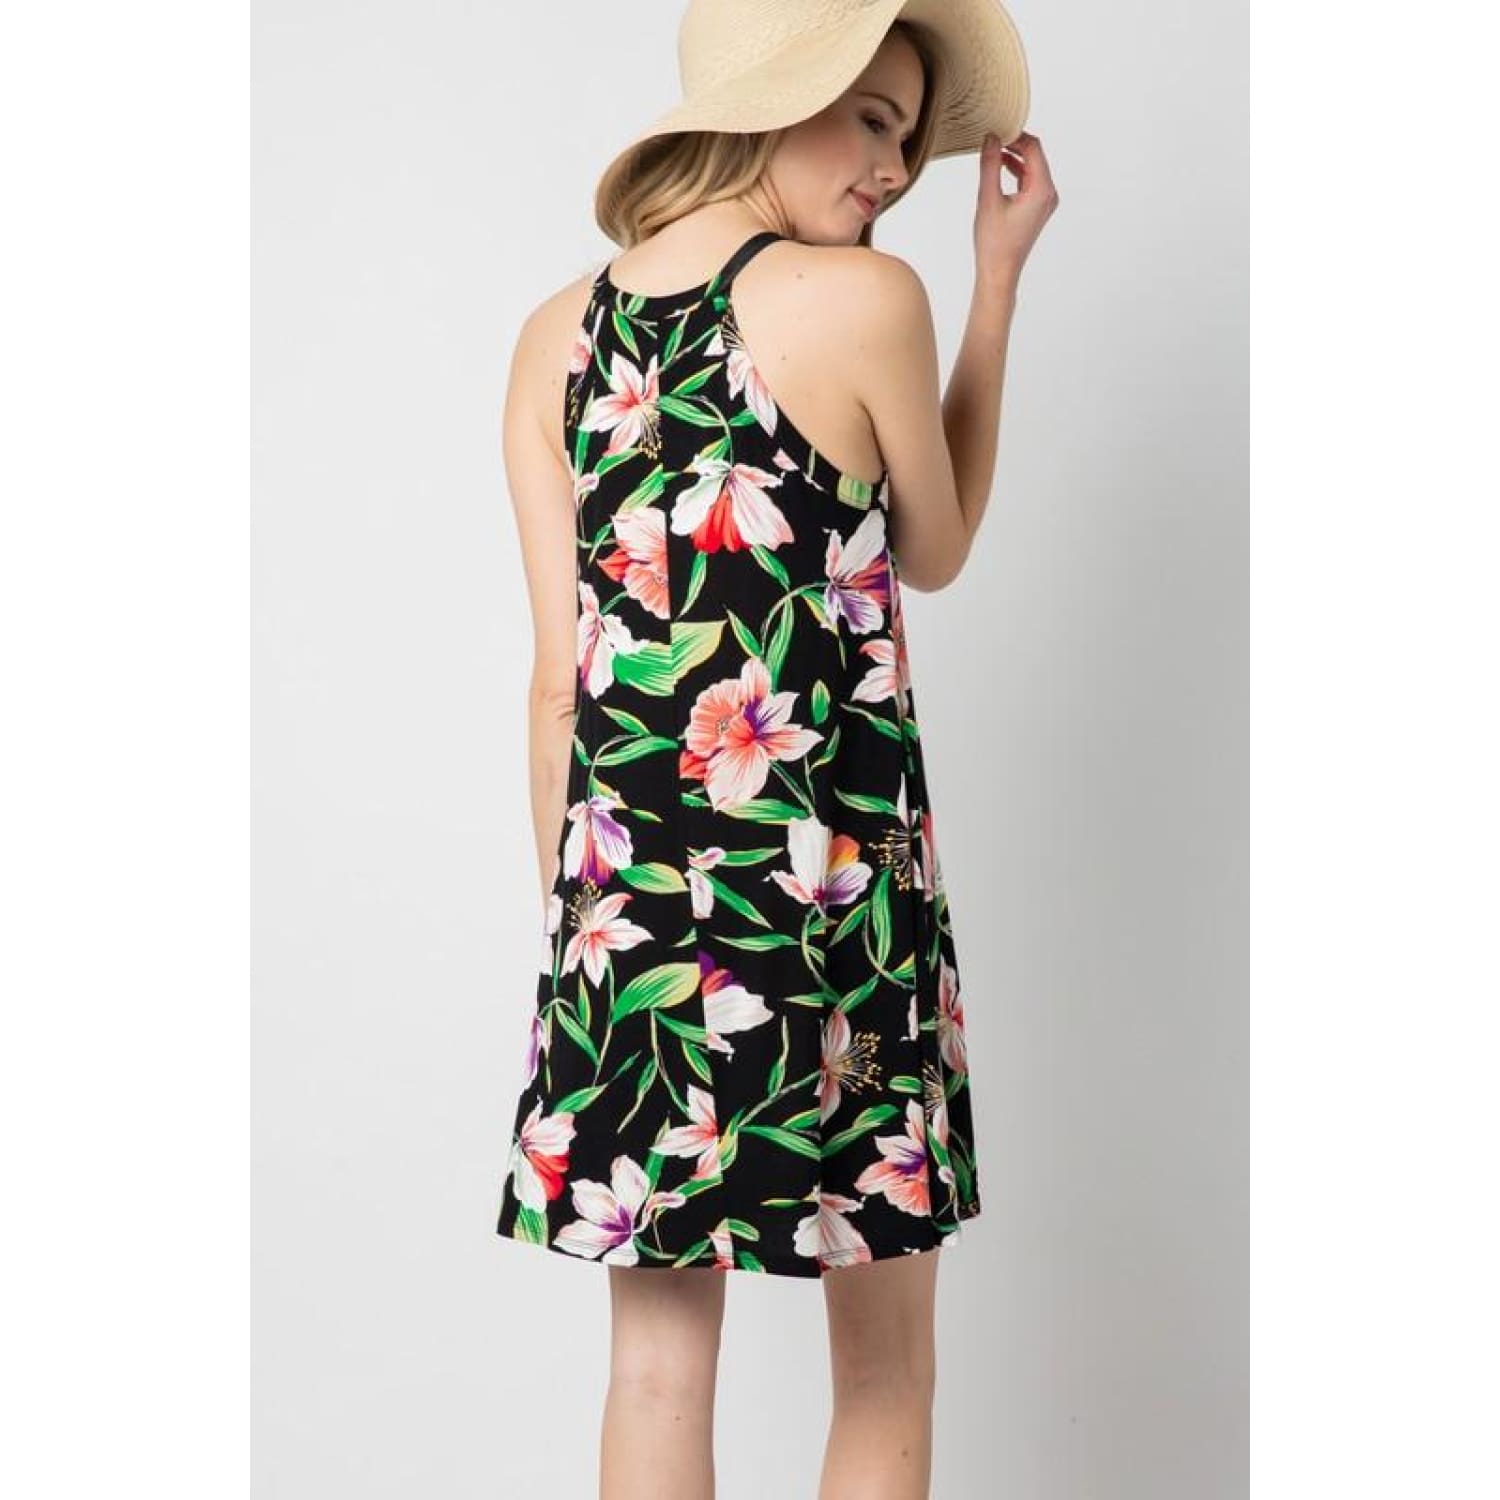 MOMMY&ME Black Floral Dress - Best YOU by HTS